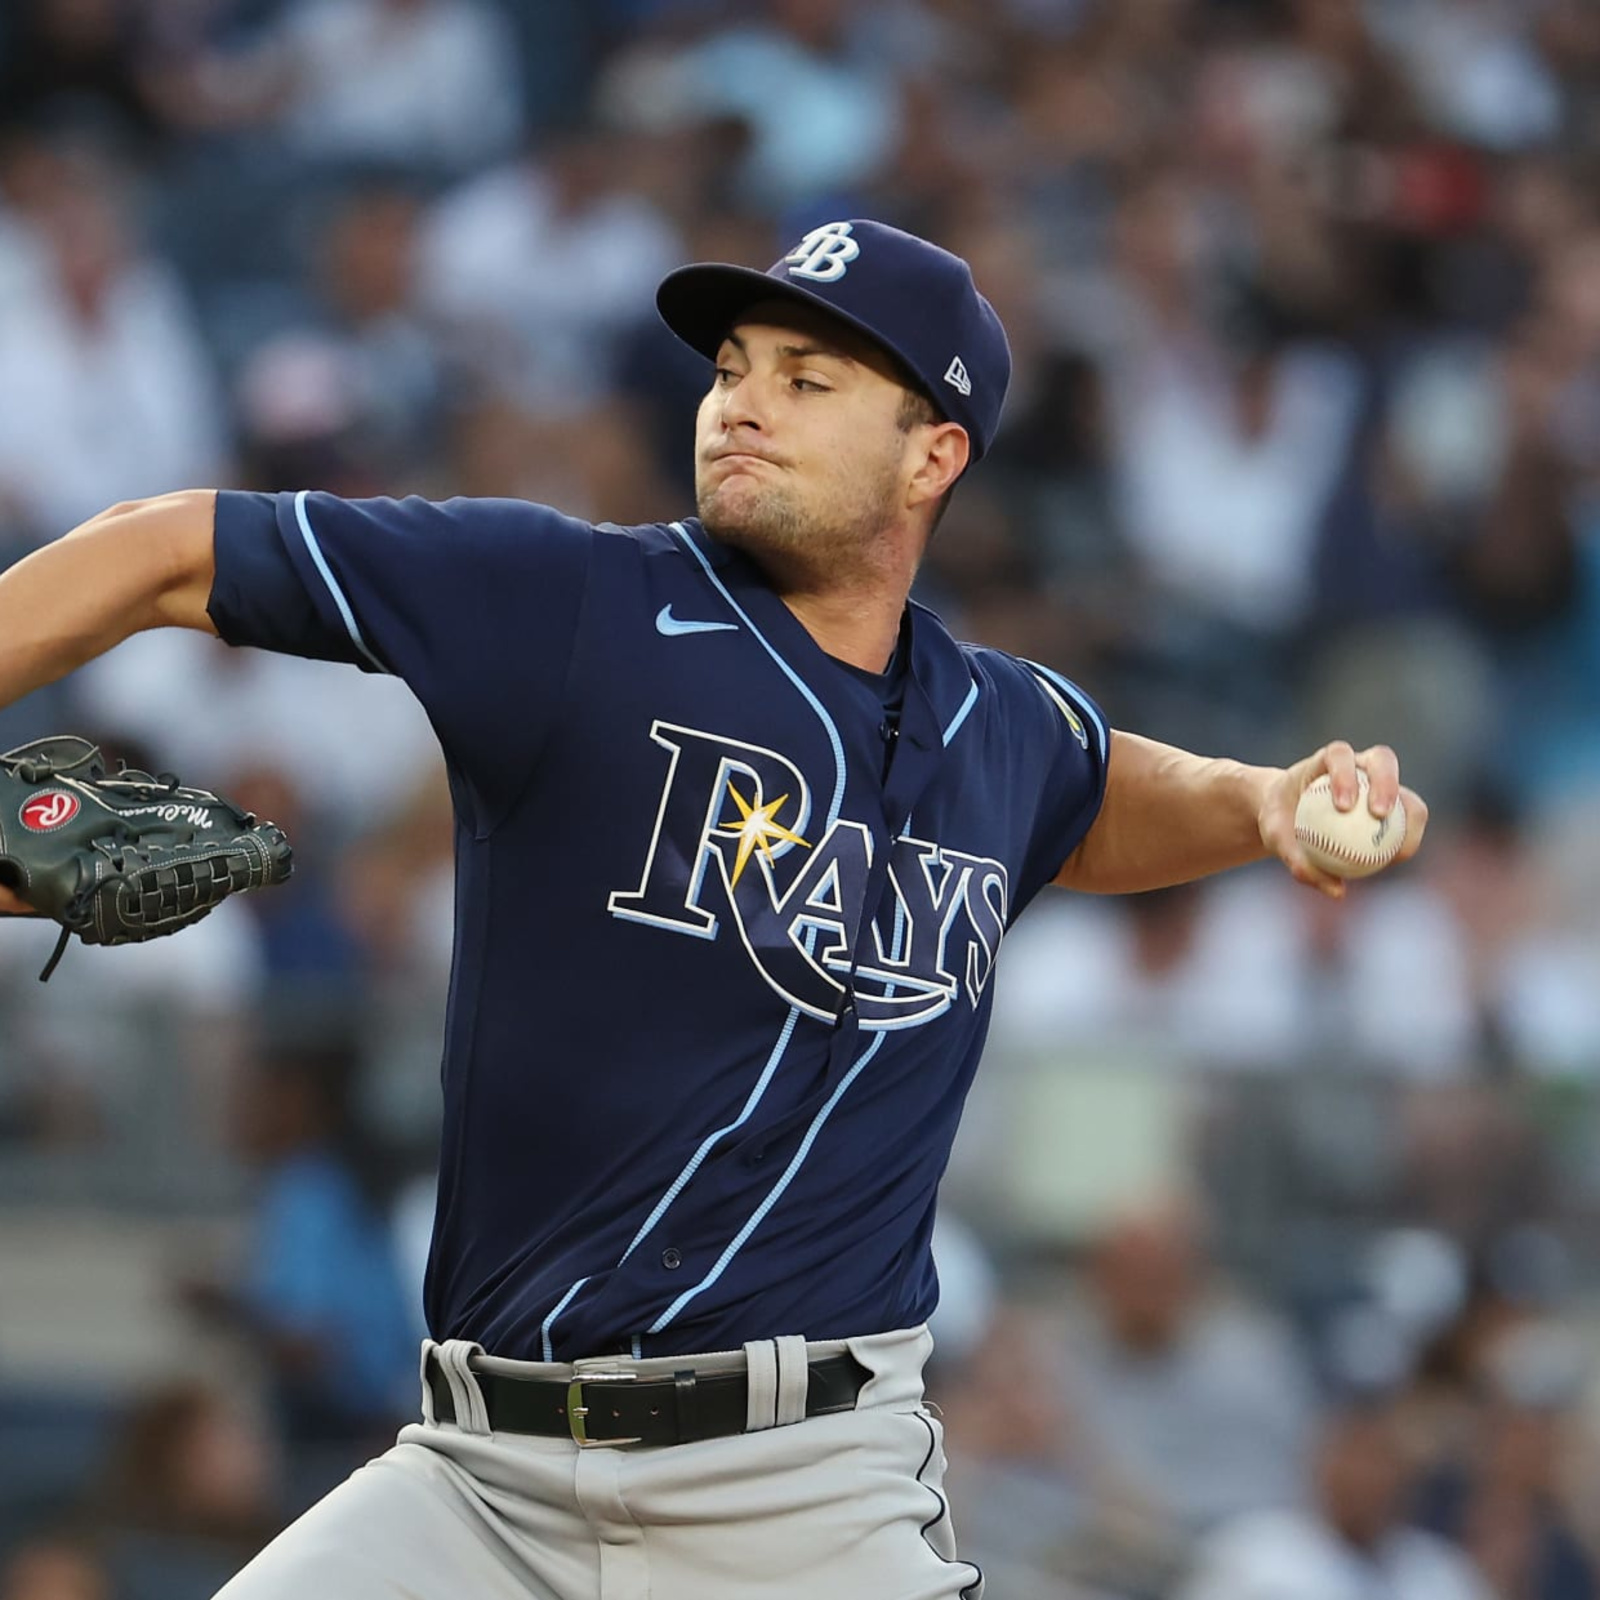 Wander Franco Sits Out of Rays Game Amid Investigation - The New